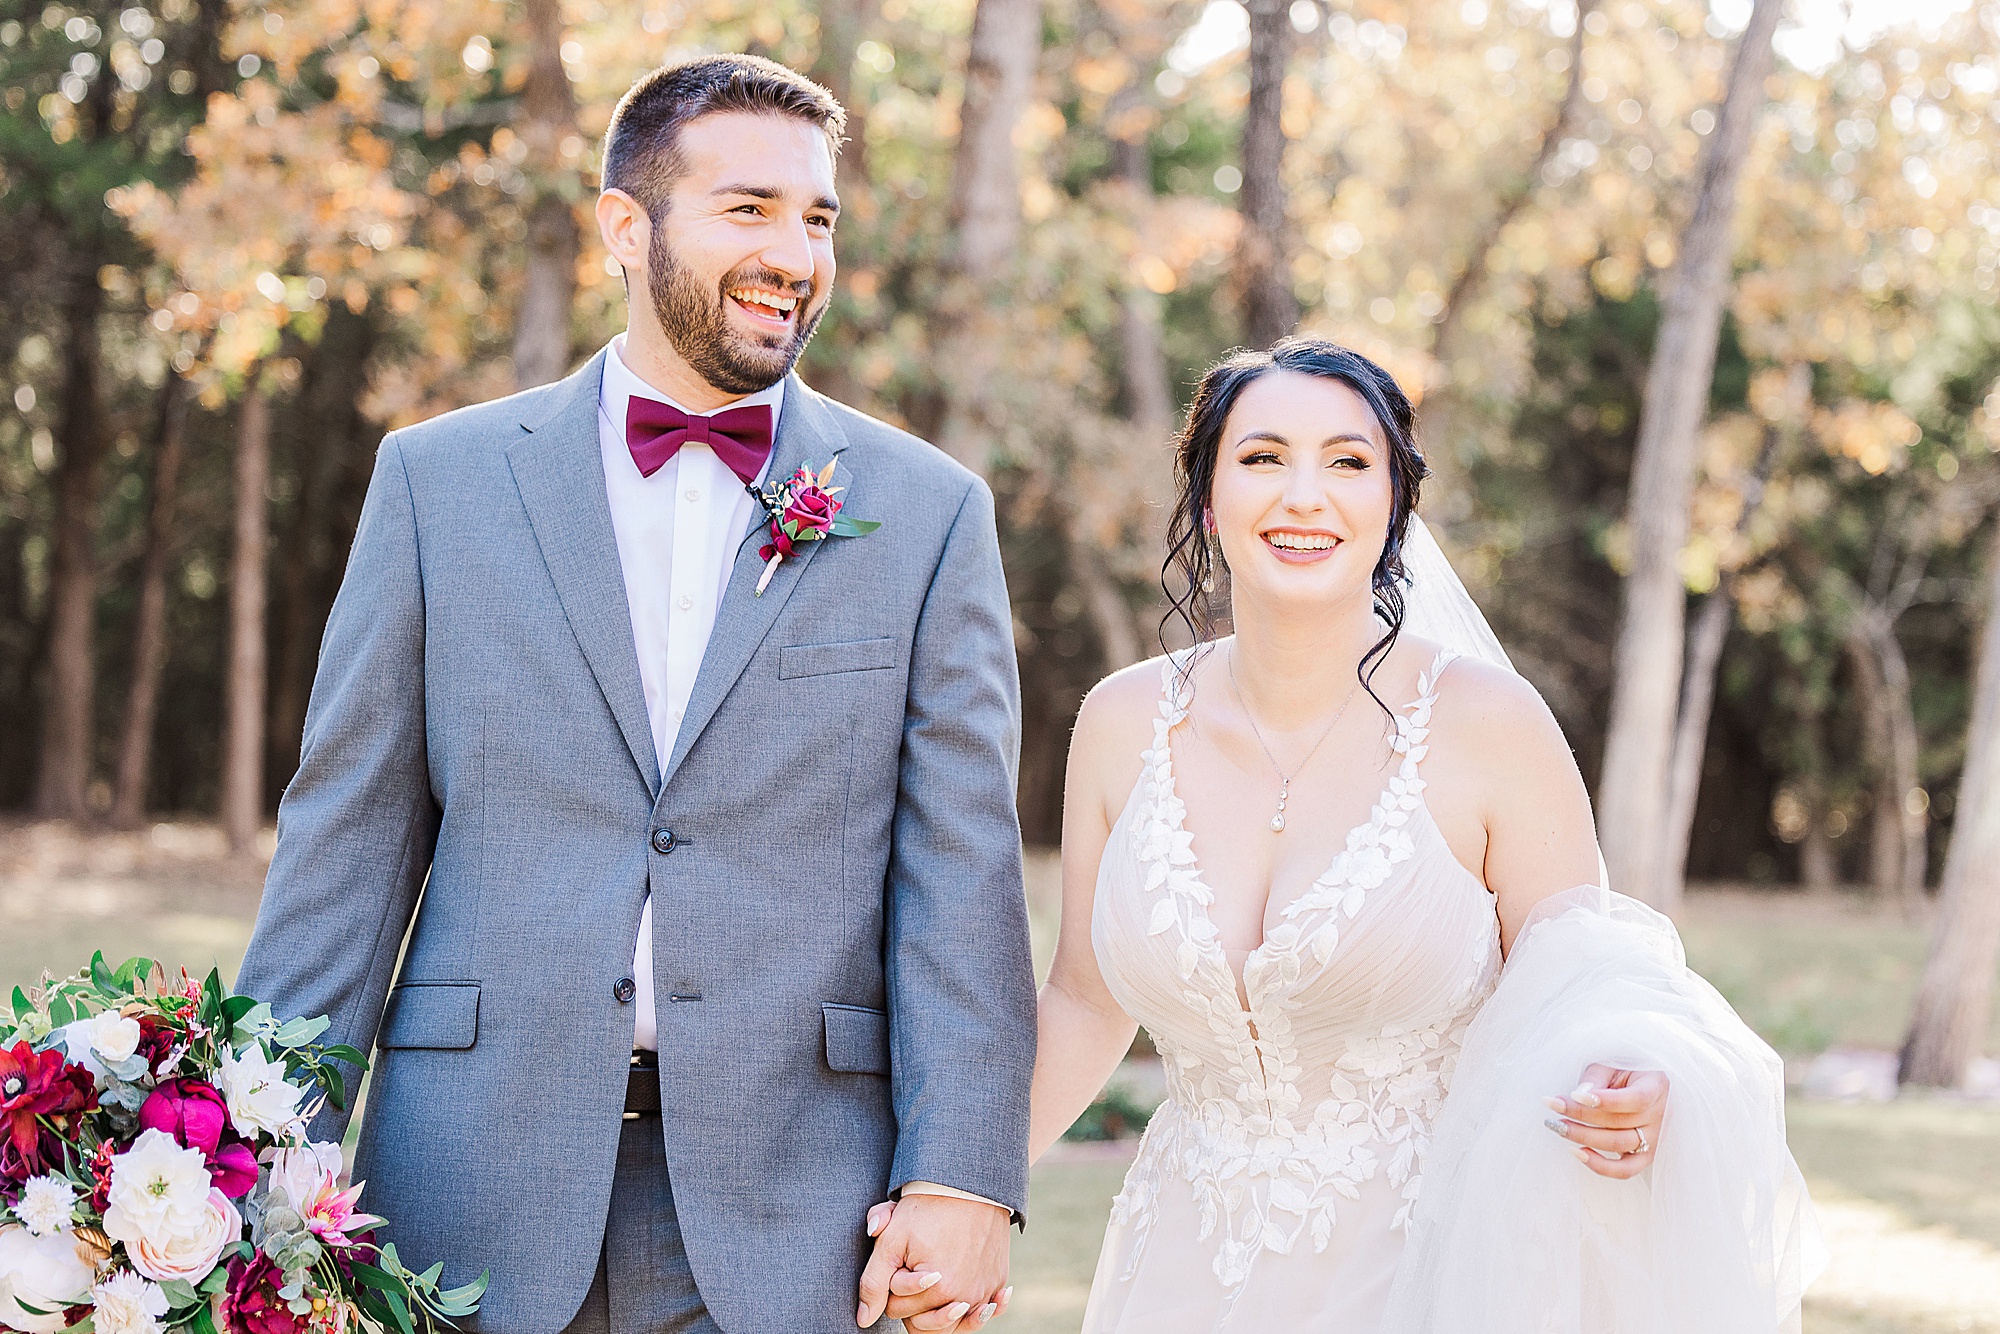 newlyweds hold hands walking together on wedding day